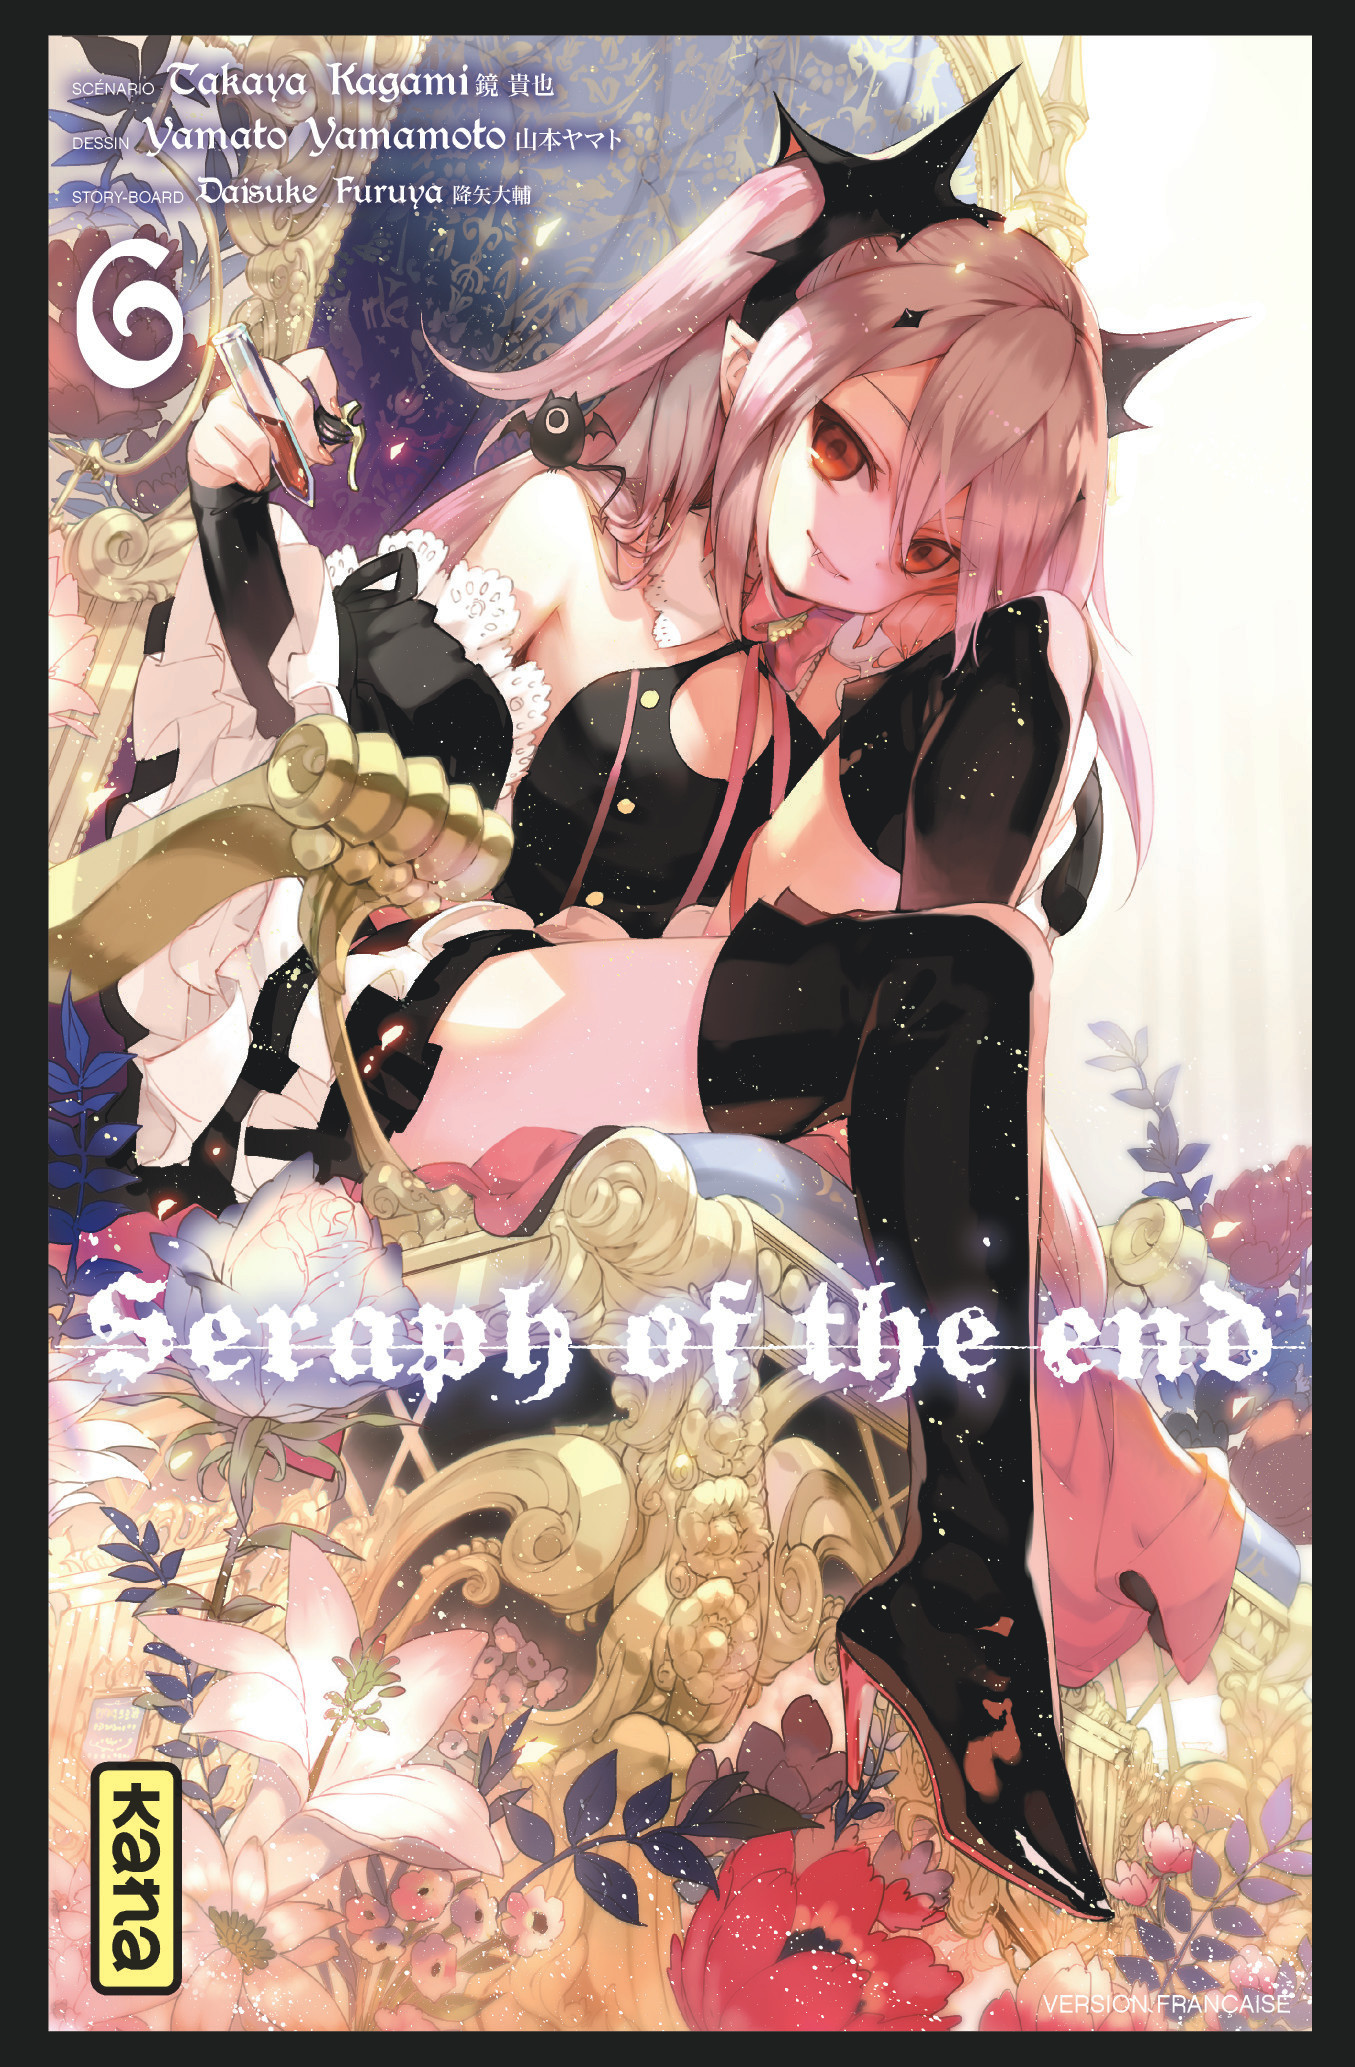 Seraph of the end – Tome 6 - couv